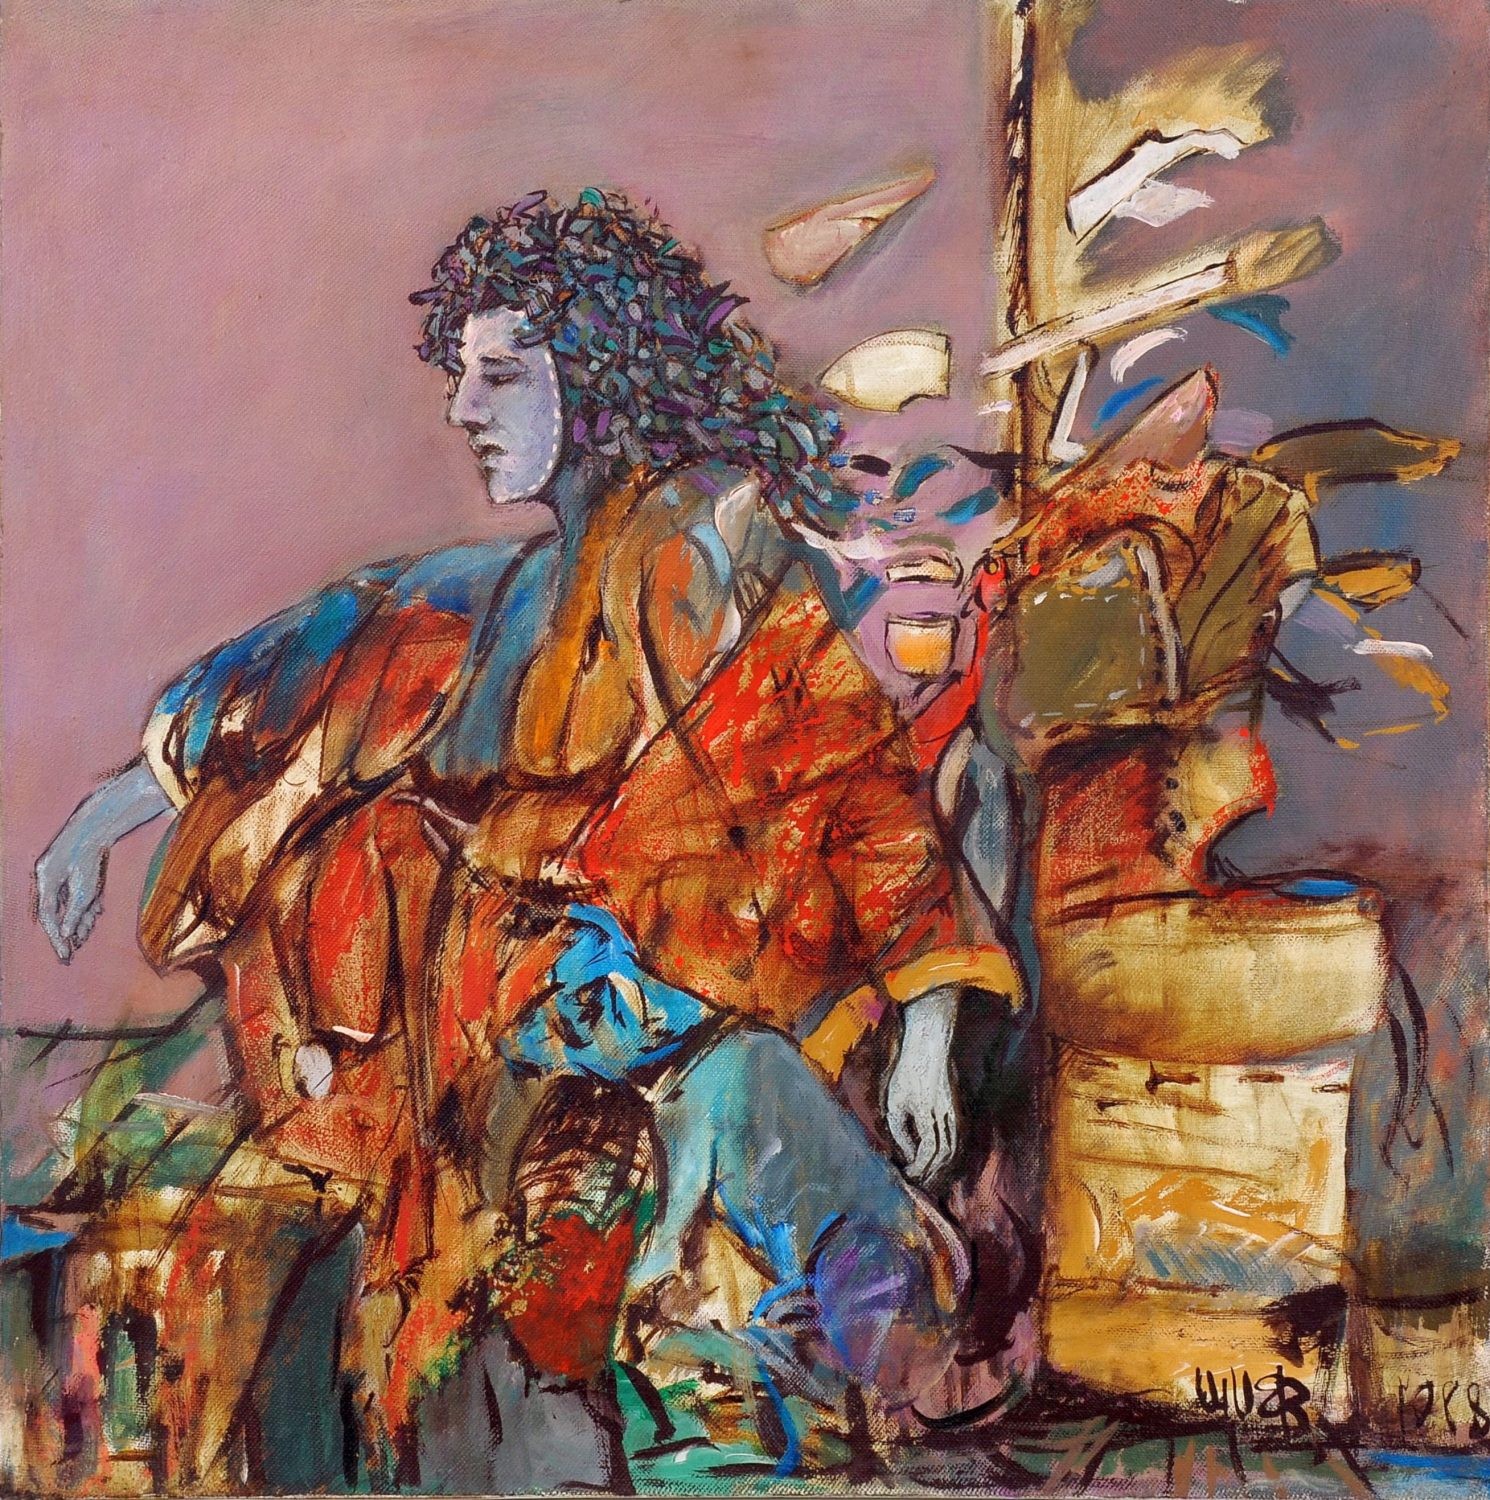 thumbnail of Character and dog pondering by Ecuadorian artist Carlos Viver. medium: acrylic on canvas. Dimensions: 23.5 x 23.5 inches. date: 1967